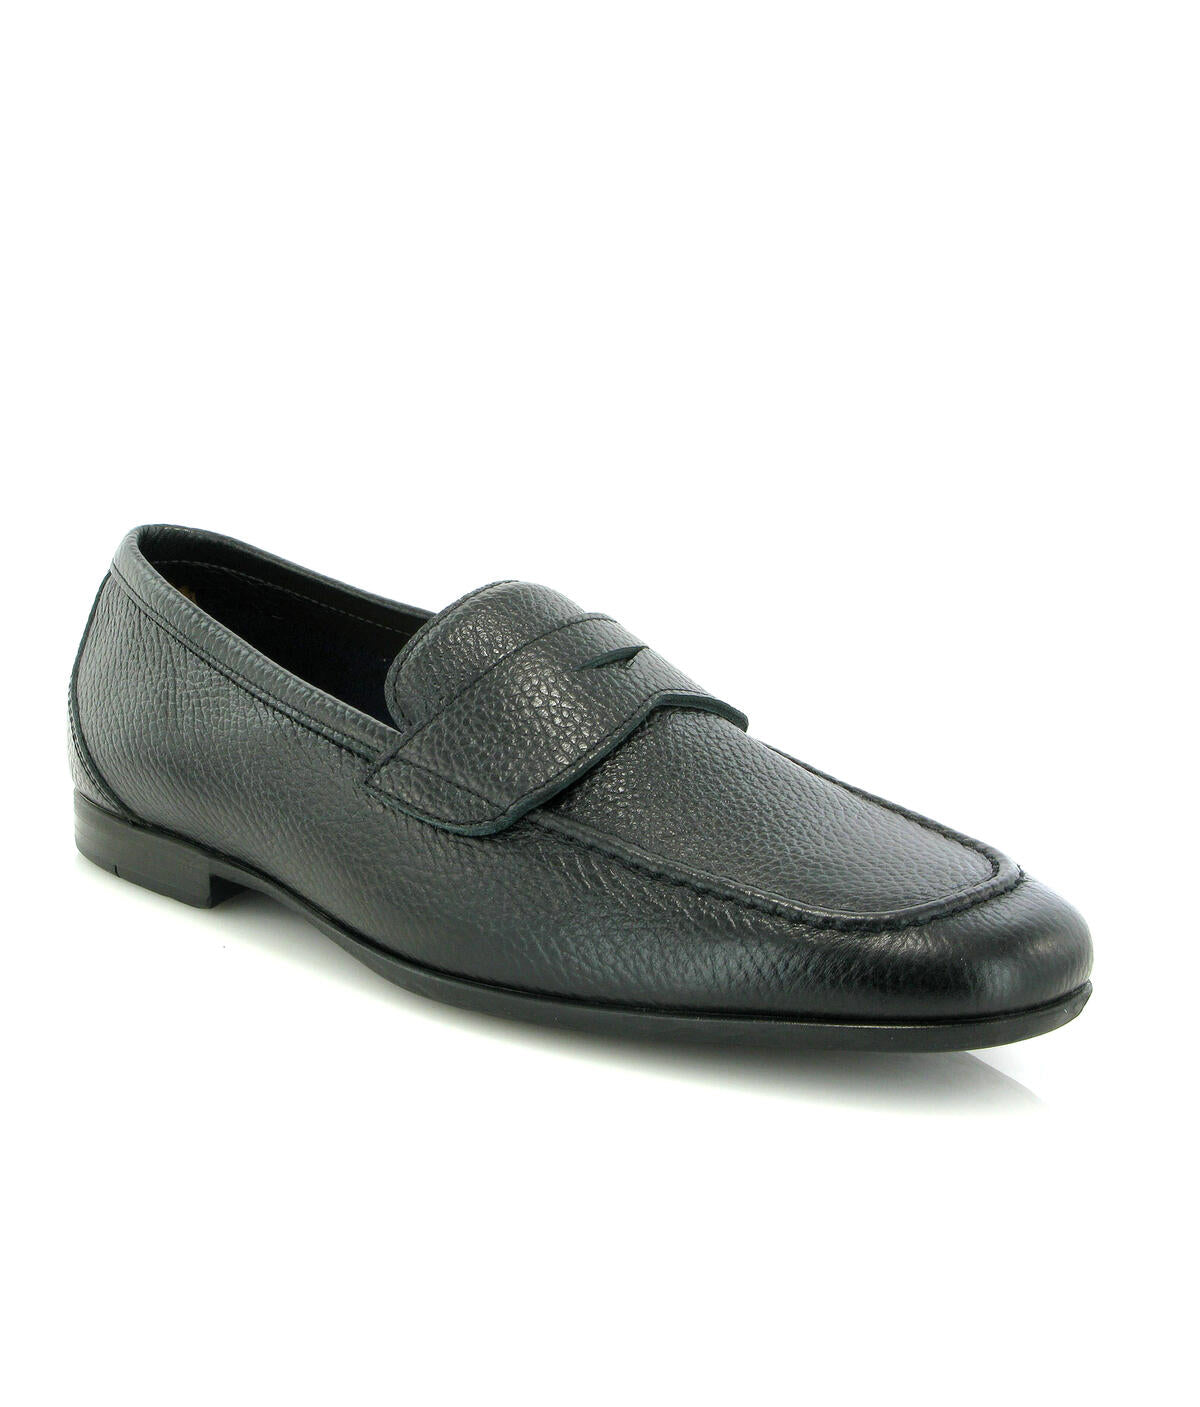 Yacht Loafers in Grainy Leather - Black - Atlanta Mocassin